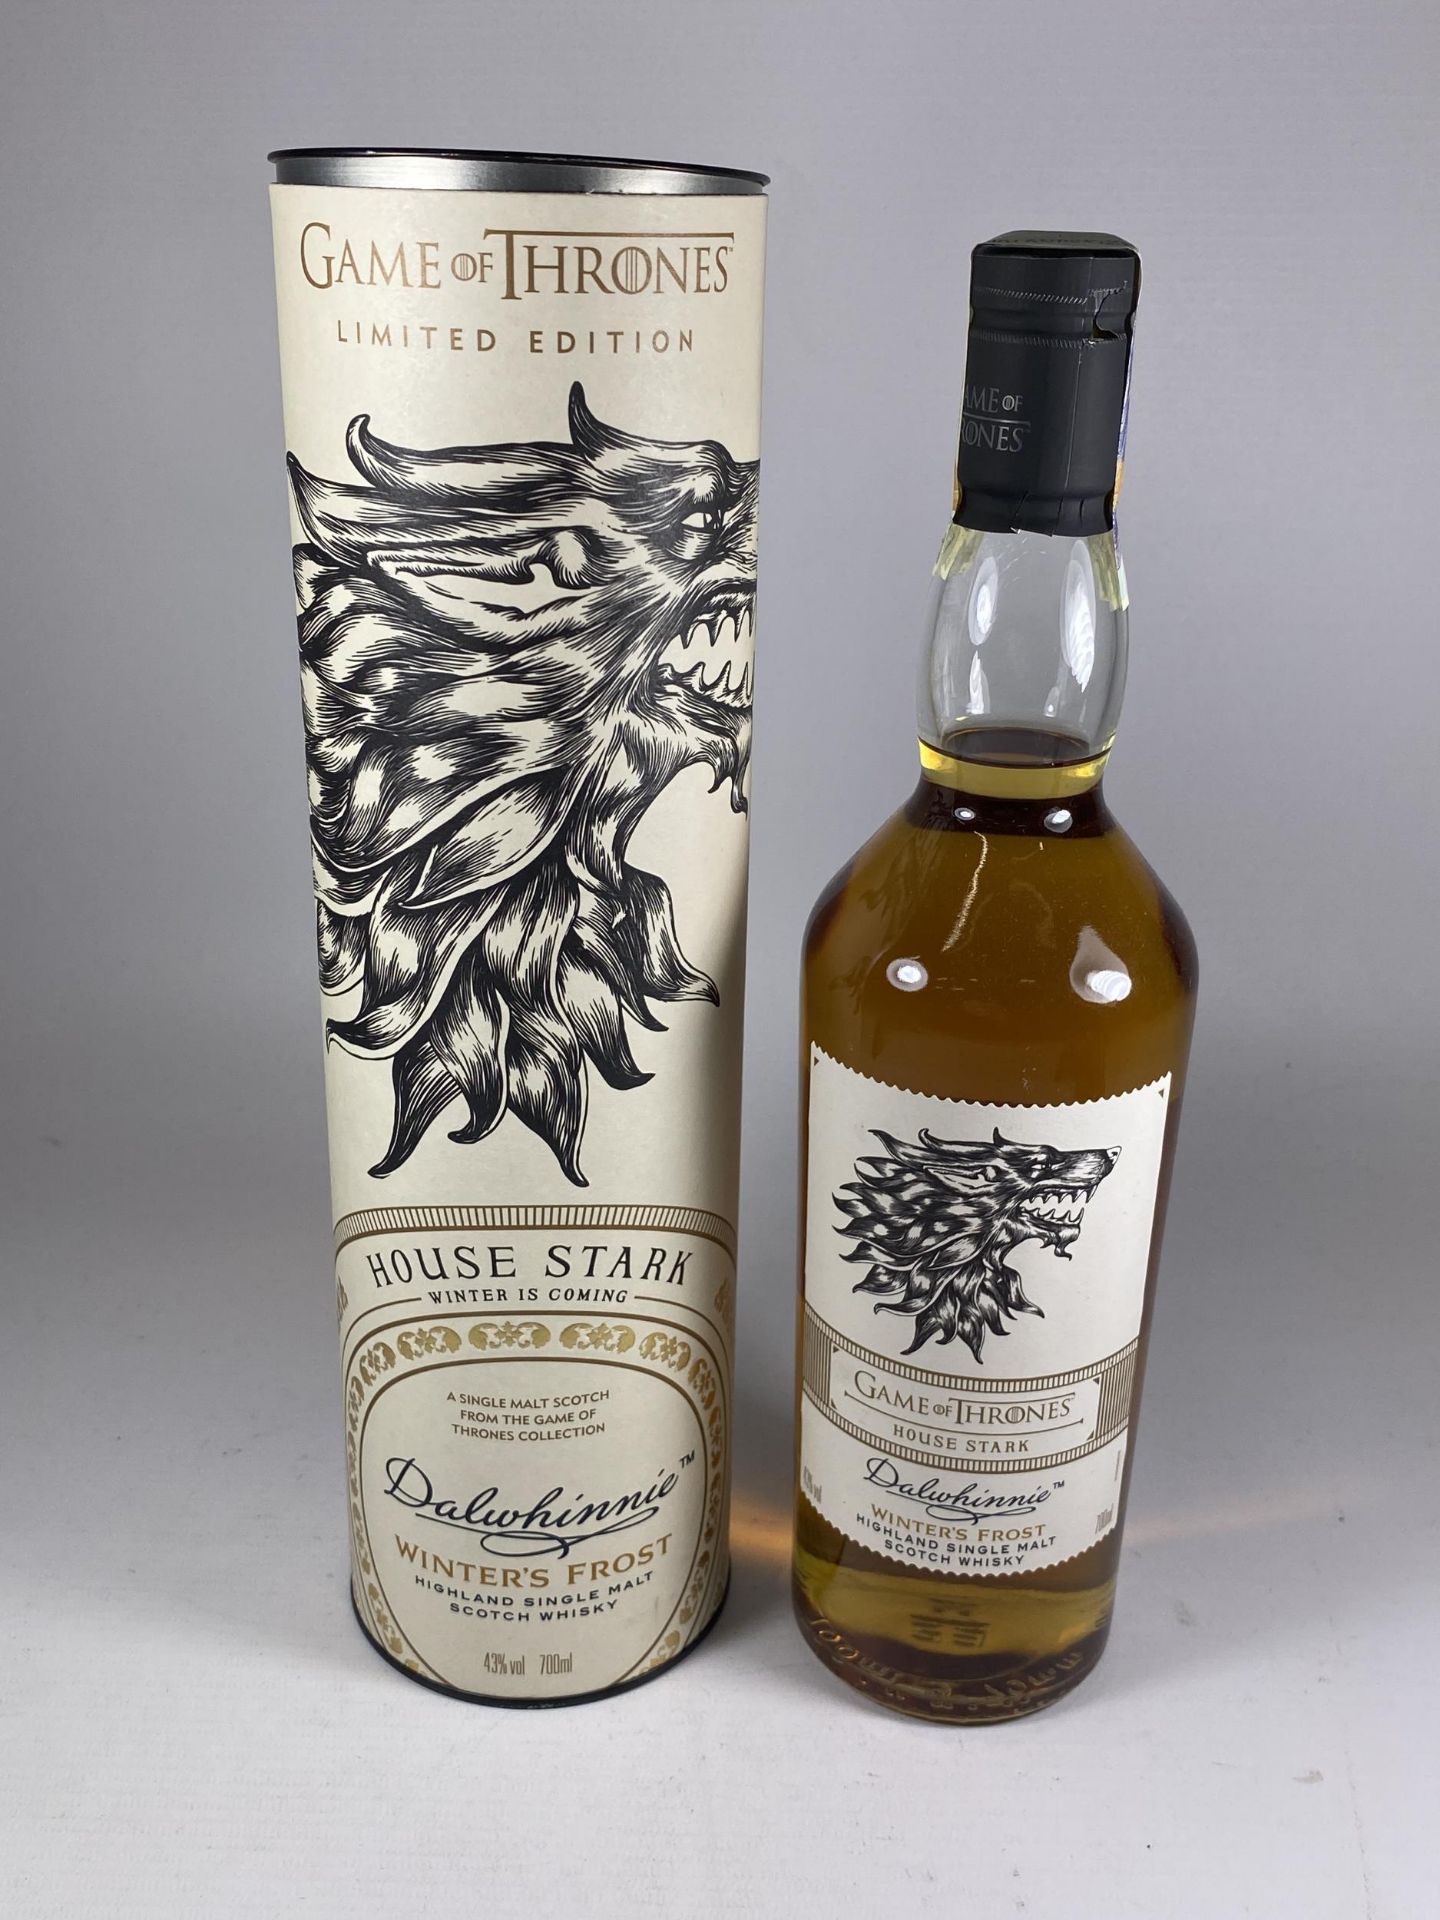 1 X 70CL BOXED BOTTLE - A GAME OF THRONES LIMITED EDITION DALWHINNIE WINTER'S FROST HIGHLAND